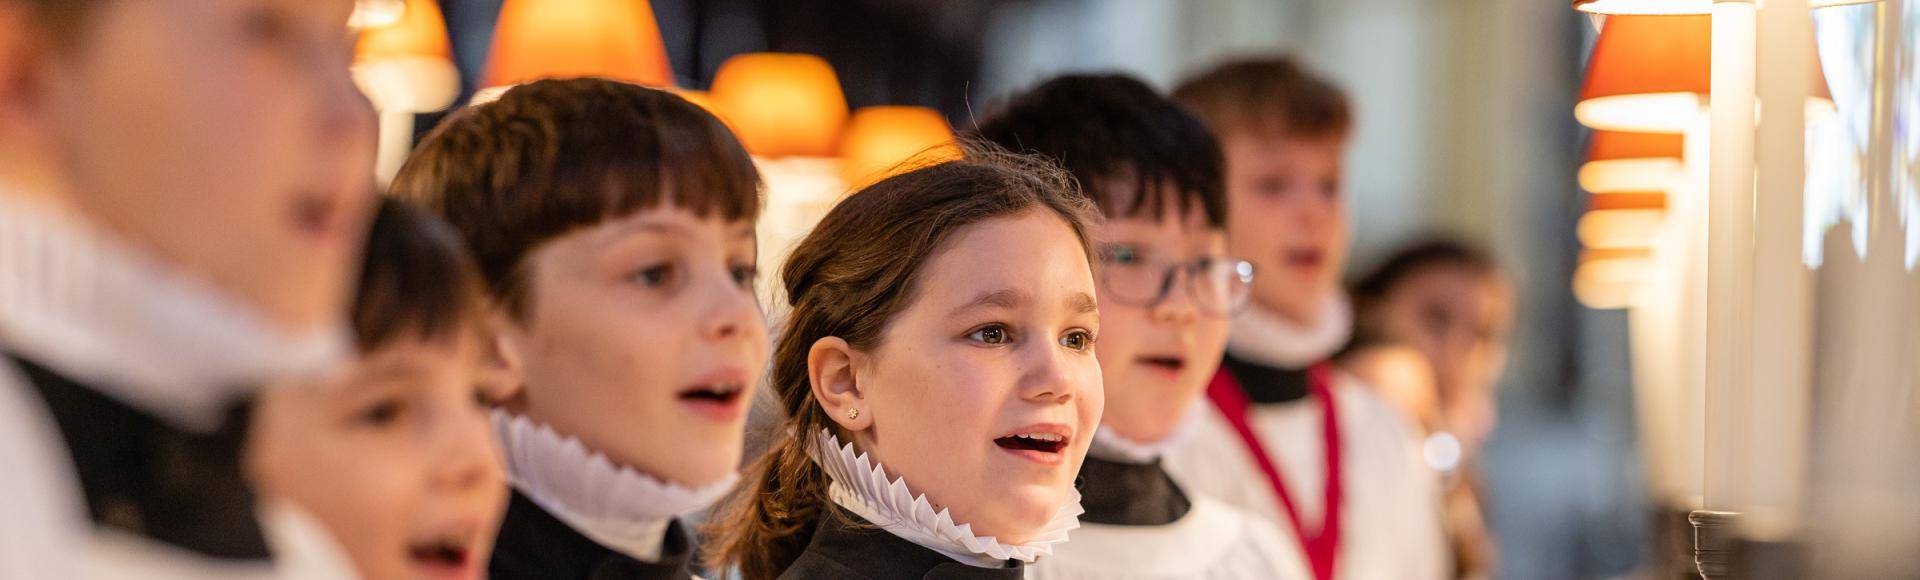 Girl and boy choristers in robes singing in the quire